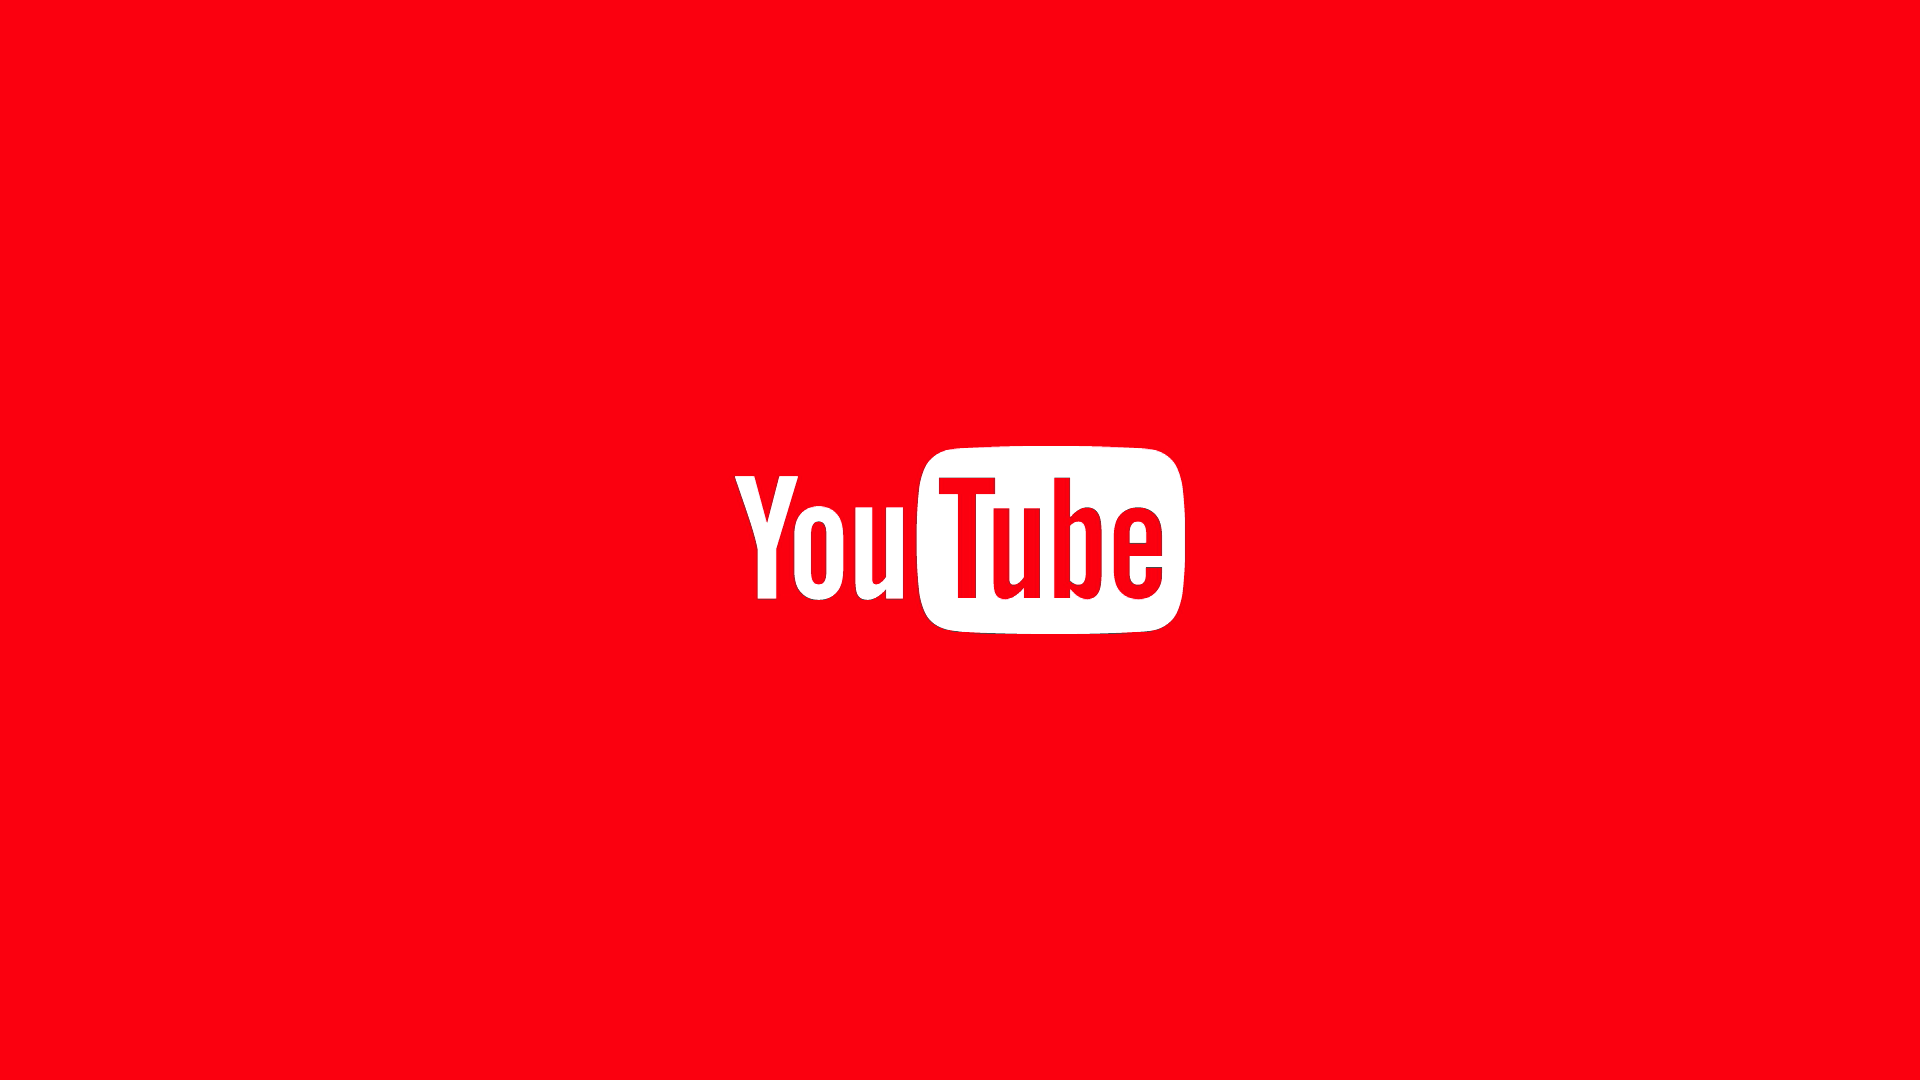 Youtube - The most popular social media platforms in the world